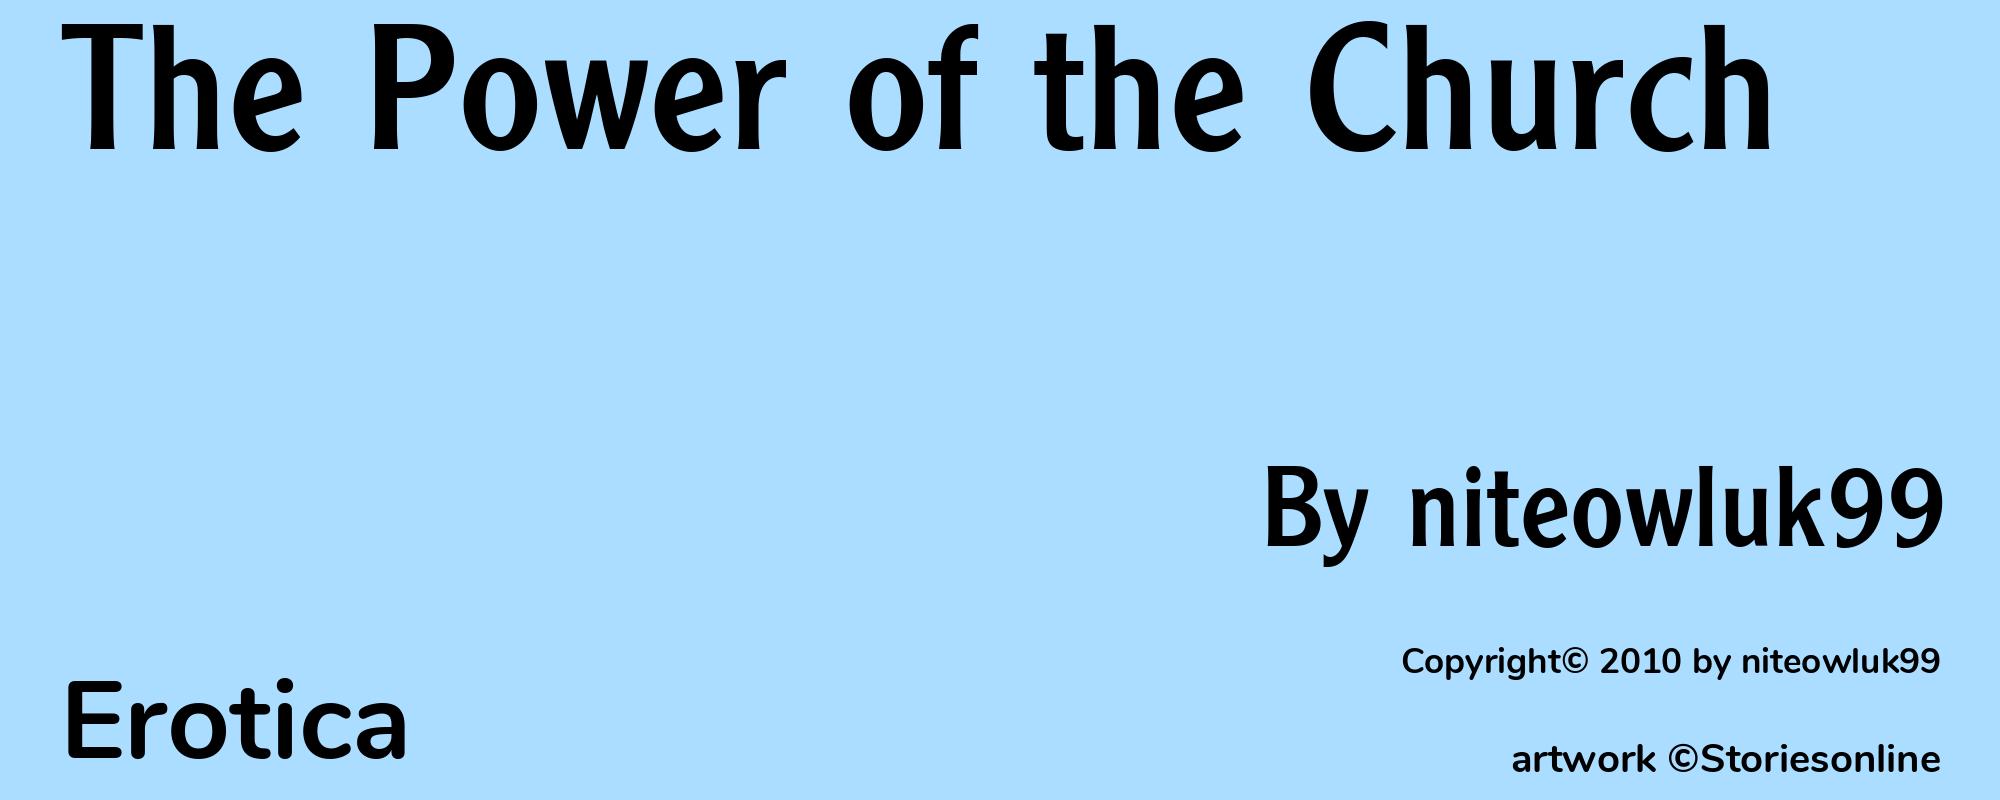 The Power of the Church - Cover